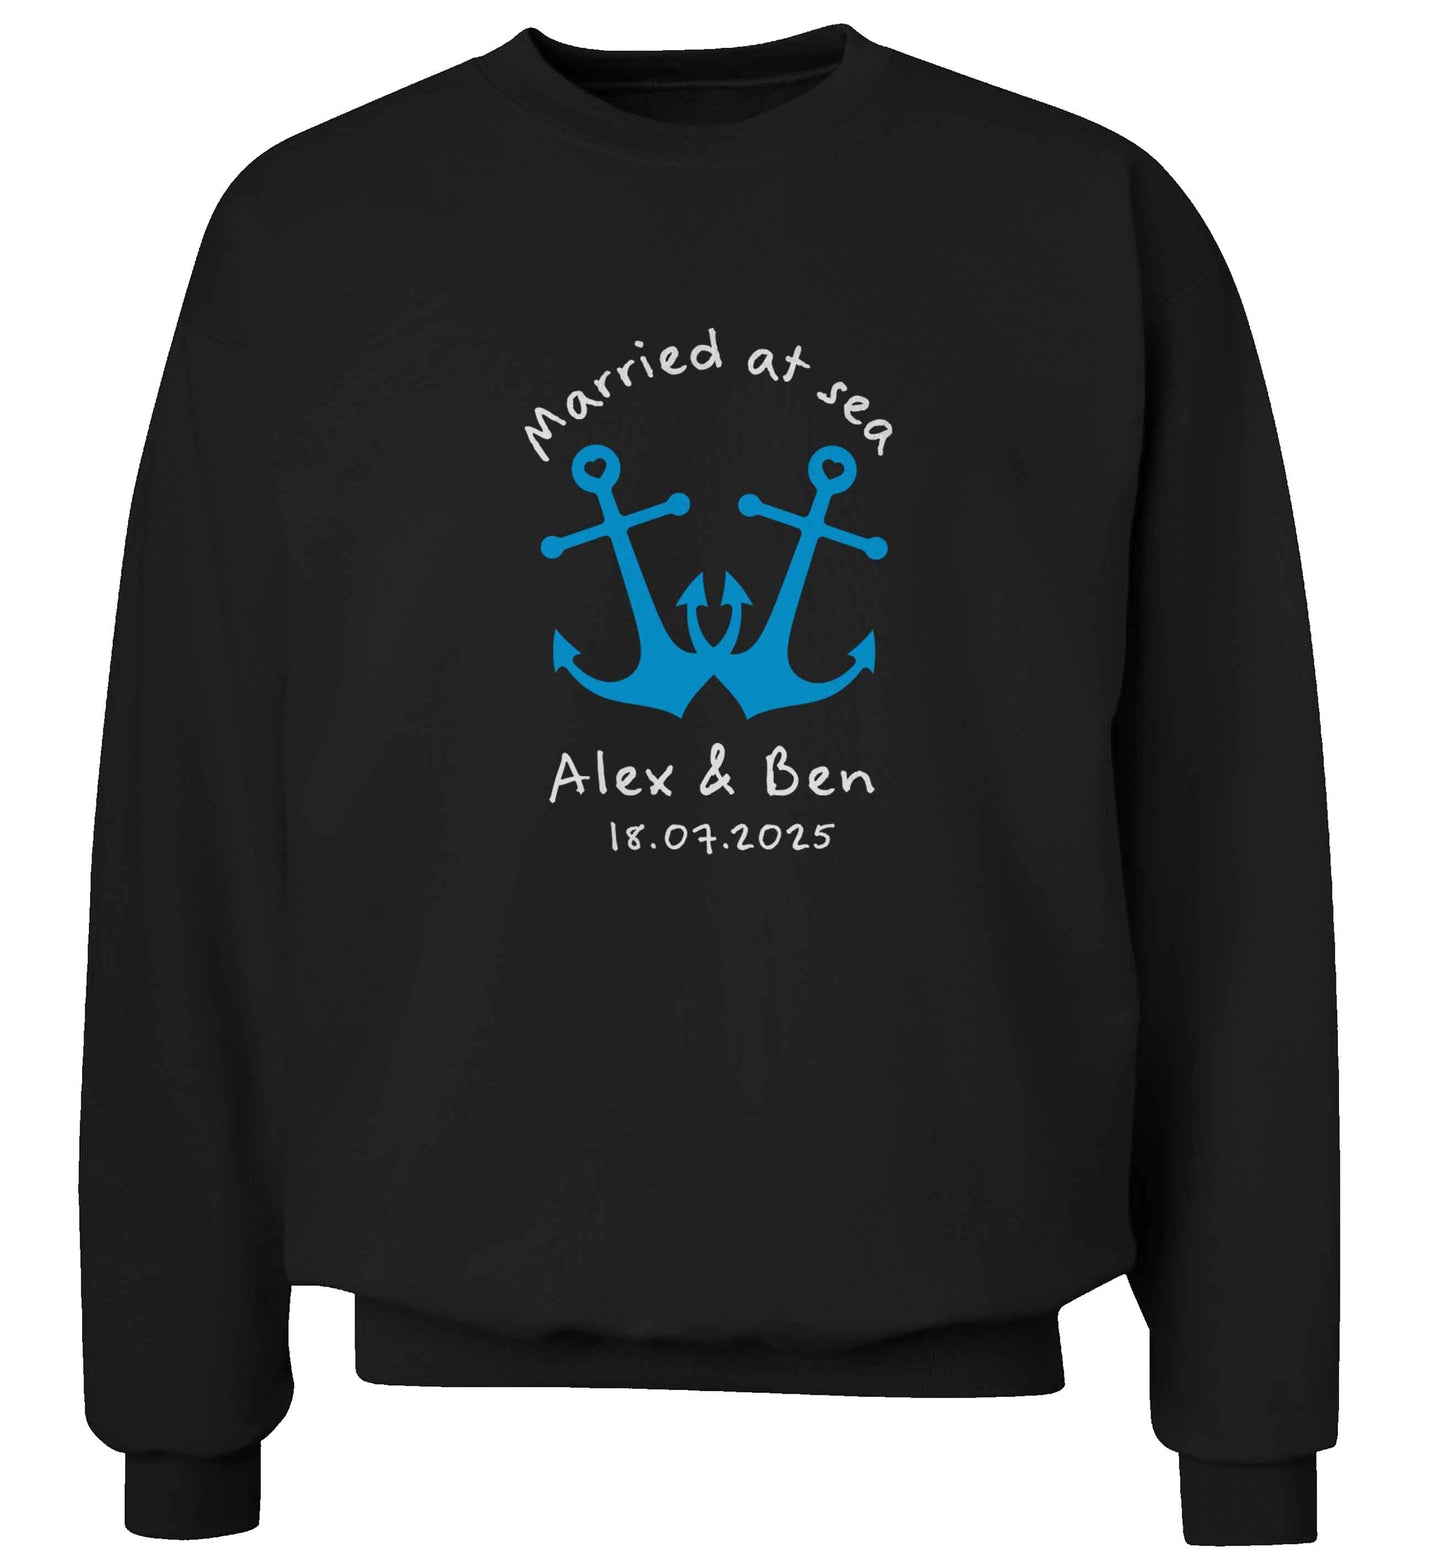 Married at sea blue anchors adult's unisex black sweater 2XL